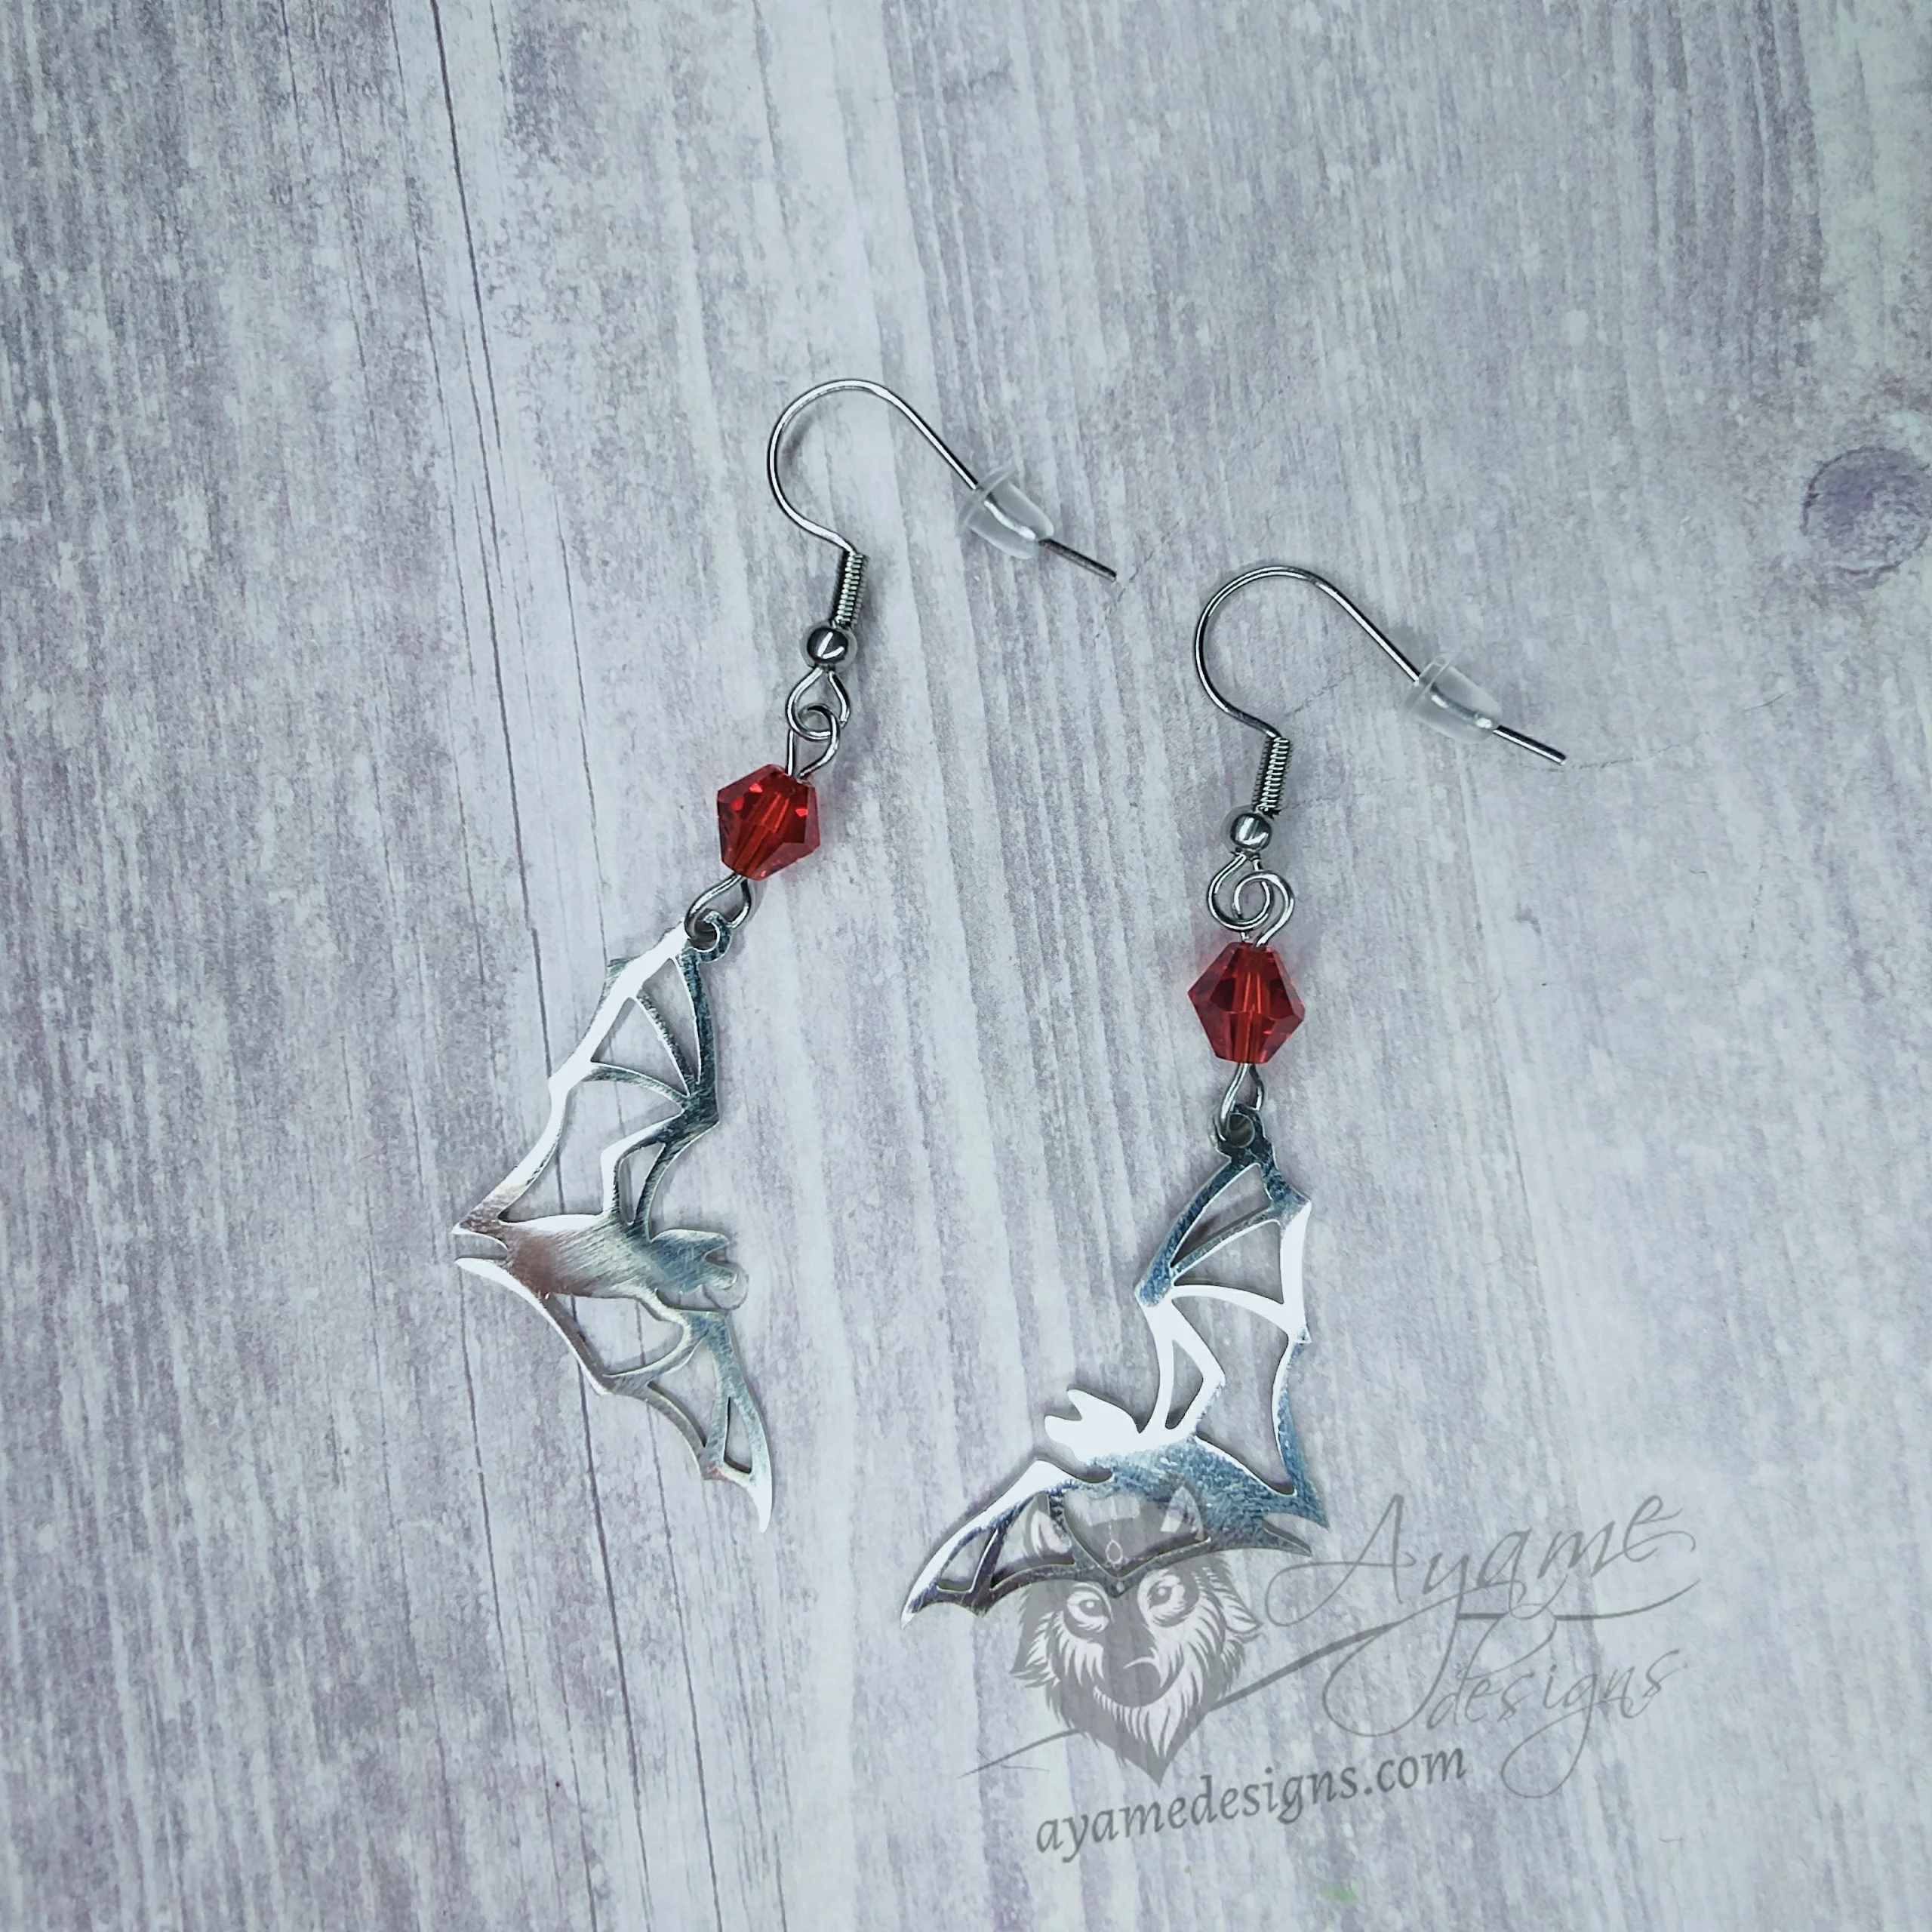 Handmade earrings with laser cut stainless steel bat charms with red Austrian crystal beads, on stainless steel earring hooks